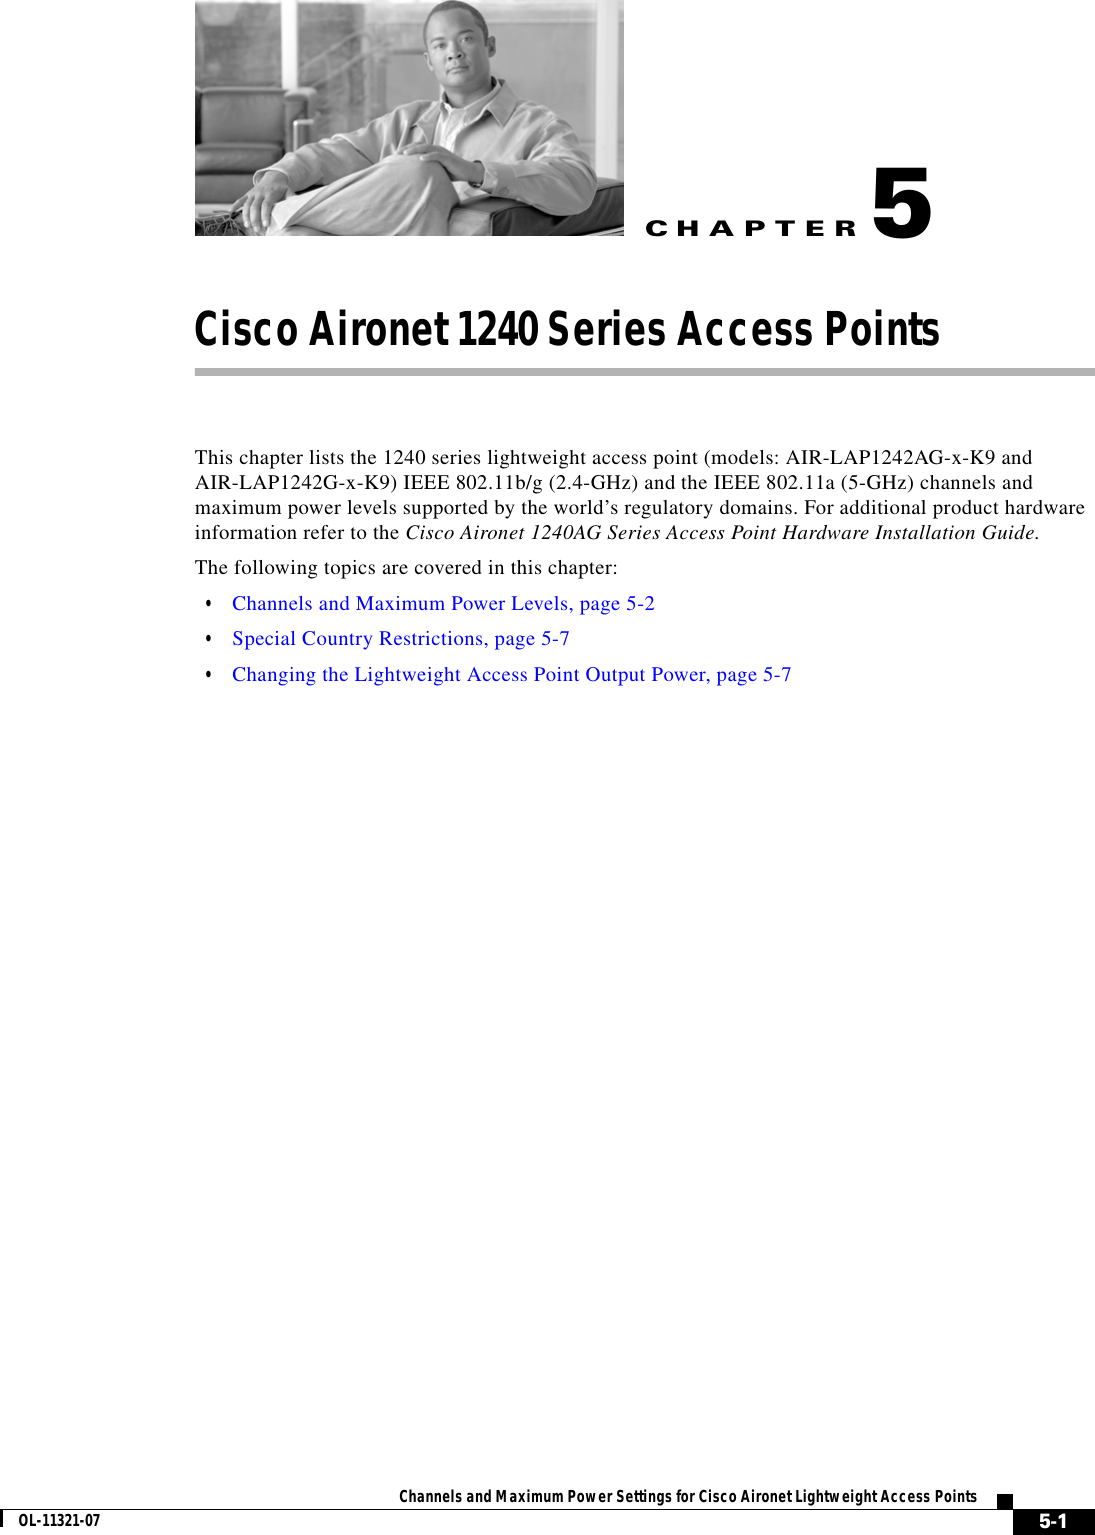 CHAPTER 5-1Channels and Maximum Power Settings for Cisco Aironet Lightweight Access PointsOL-11321-075Cisco Aironet 1240 Series Access PointsThis chapter lists the 1240 series lightweight access point (models: AIR-LAP1242AG-x-K9 and AIR-LAP1242G-x-K9) IEEE 802.11b/g (2.4-GHz) and the IEEE 802.11a (5-GHz) channels and maximum power levels supported by the world’s regulatory domains. For additional product hardware information refer to the Cisco Aironet 1240AG Series Access Point Hardware Installation Guide.The following topics are covered in this chapter:  • Channels and Maximum Power Levels, page 5-2  • Special Country Restrictions, page 5-7  • Changing the Lightweight Access Point Output Power, page 5-7